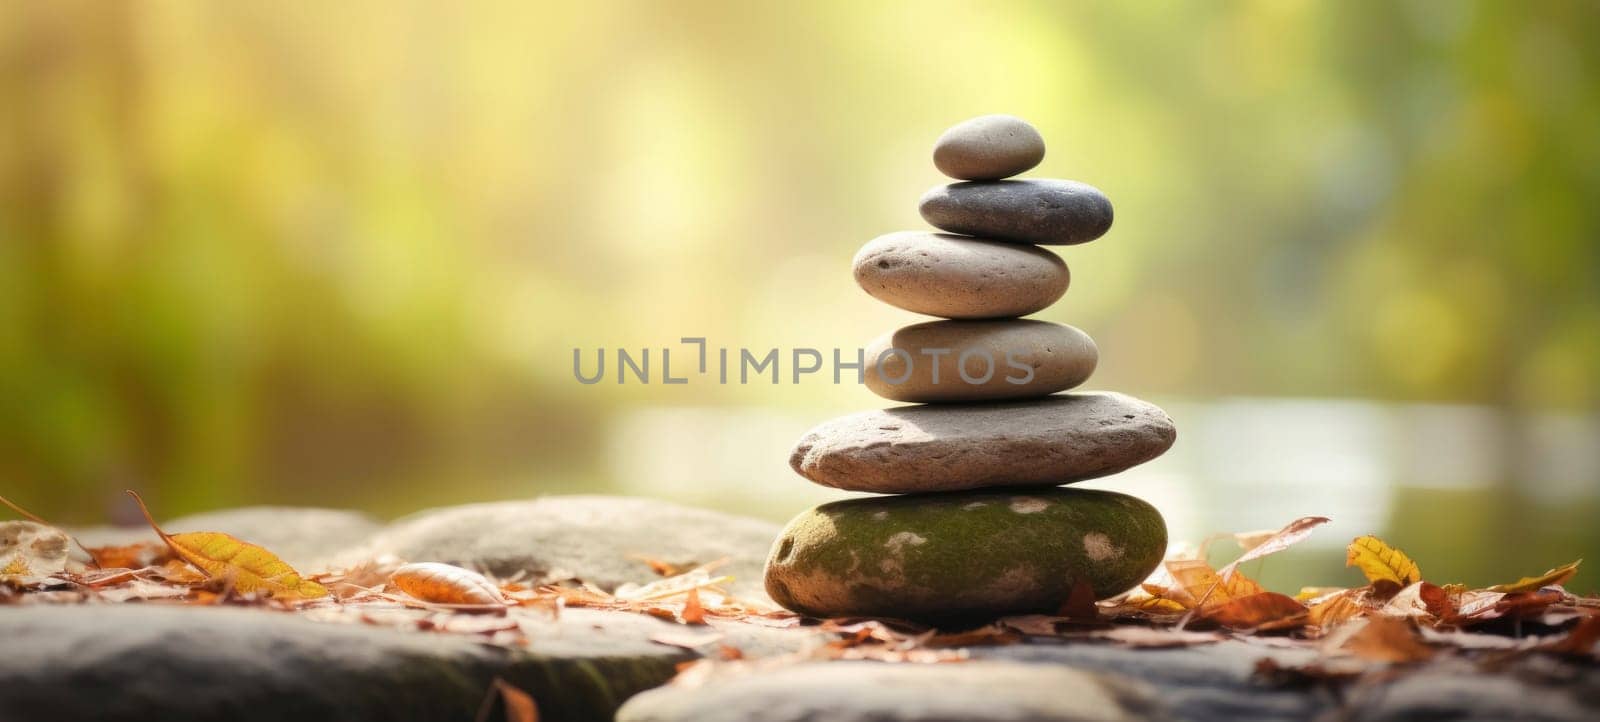 A harmonious stack of smooth river stones in a tranquil natural setting, with a soft focus on a green, sunlit background, evoking a sense of balance and calm.